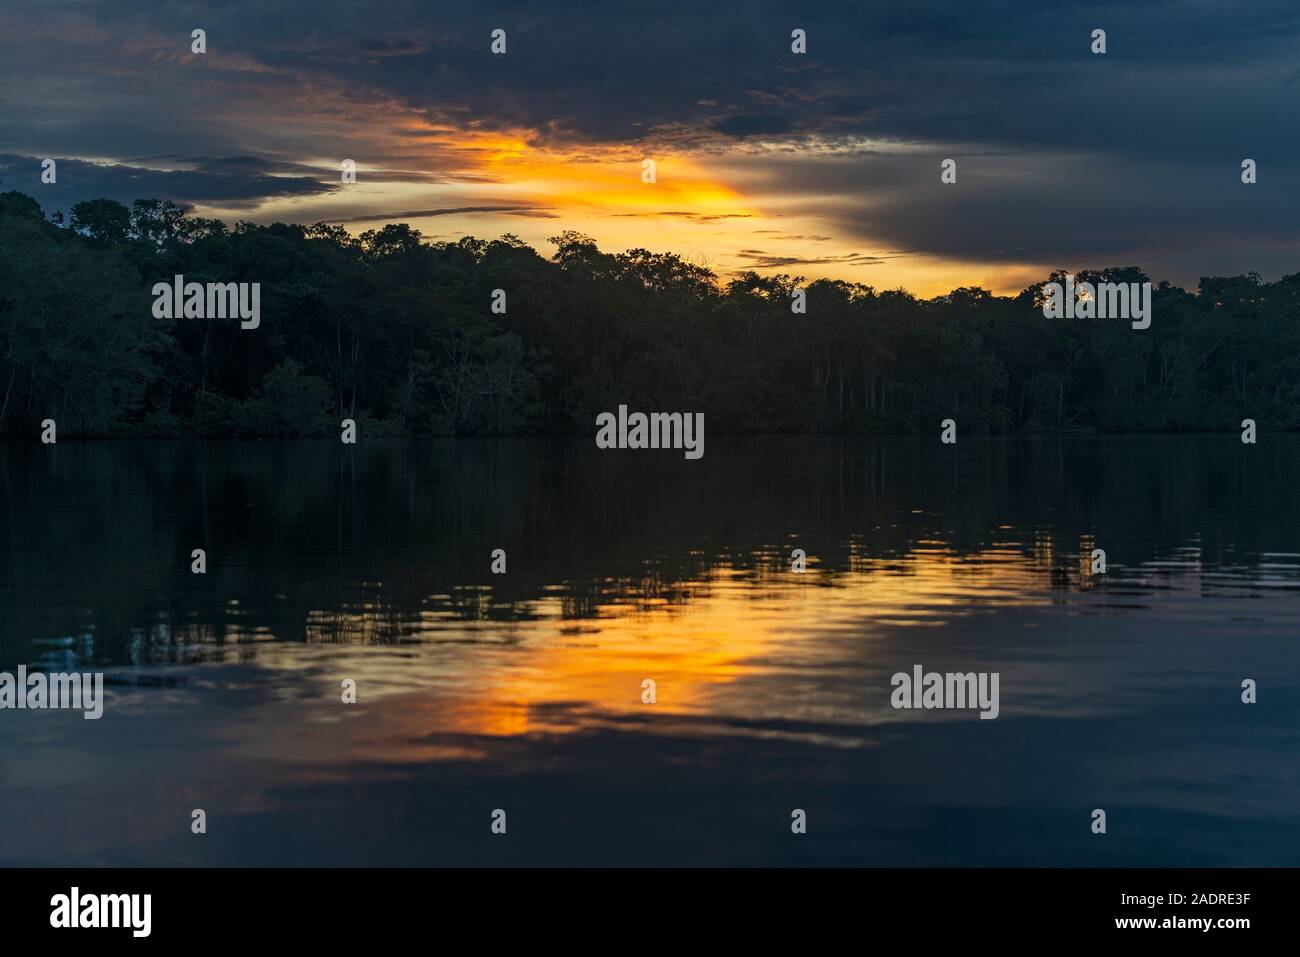 Sunset in the Amazon Rainforest River comprising the countries of Brazil, Bolivia, Colombia, Ecuador, Peru, Guyana, Suriname and Bolivia. Stock Photo